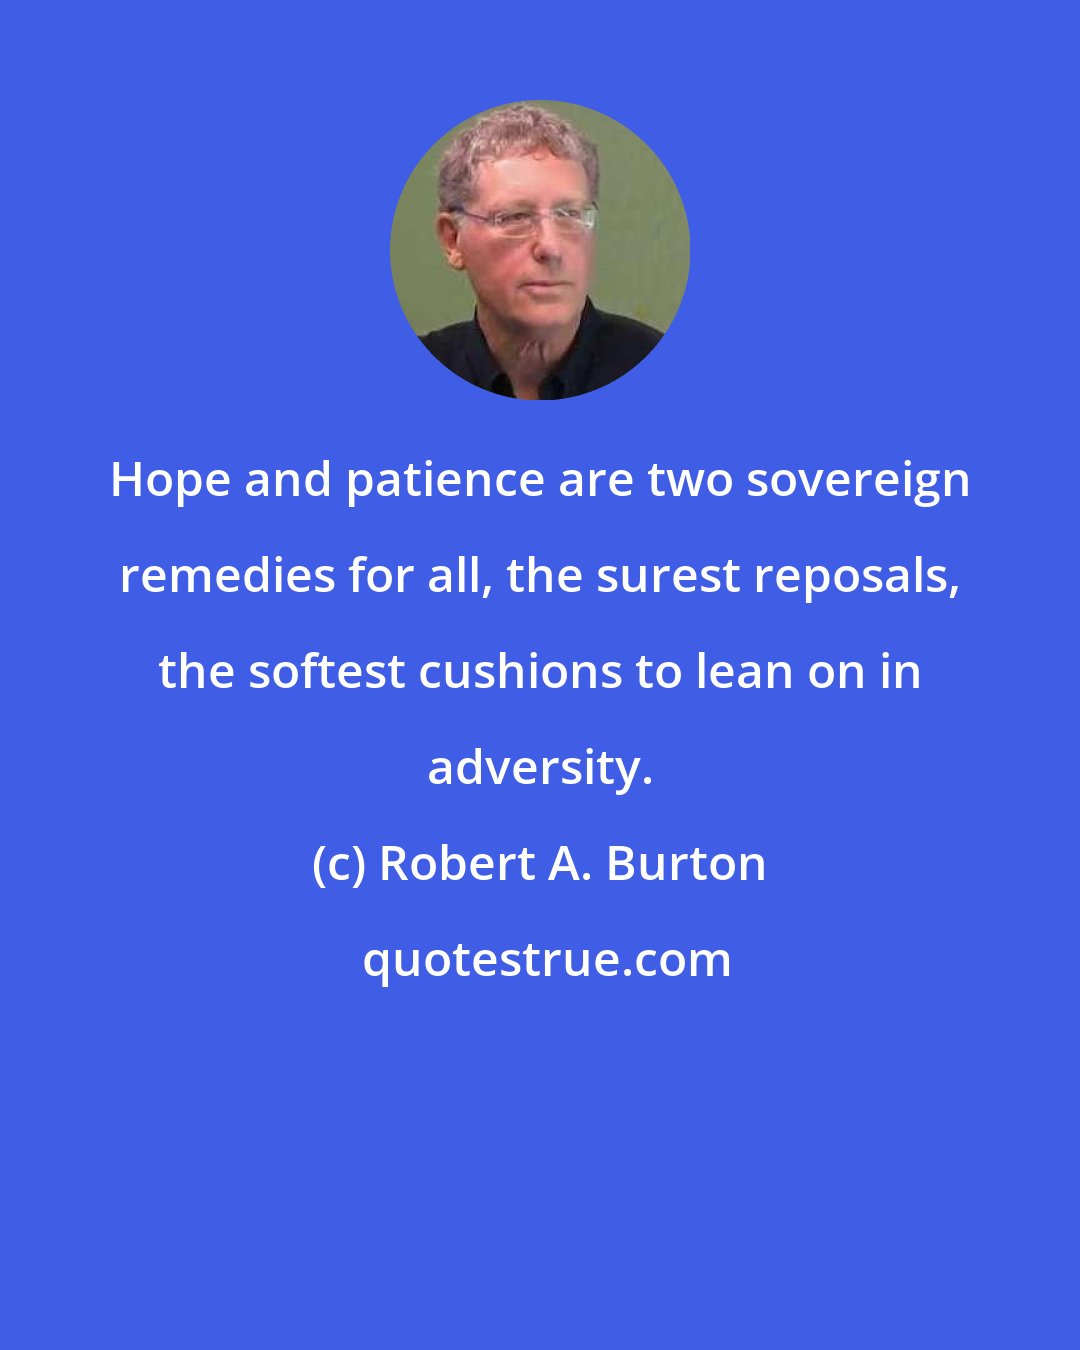 Robert A. Burton: Hope and patience are two sovereign remedies for all, the surest reposals, the softest cushions to lean on in adversity.